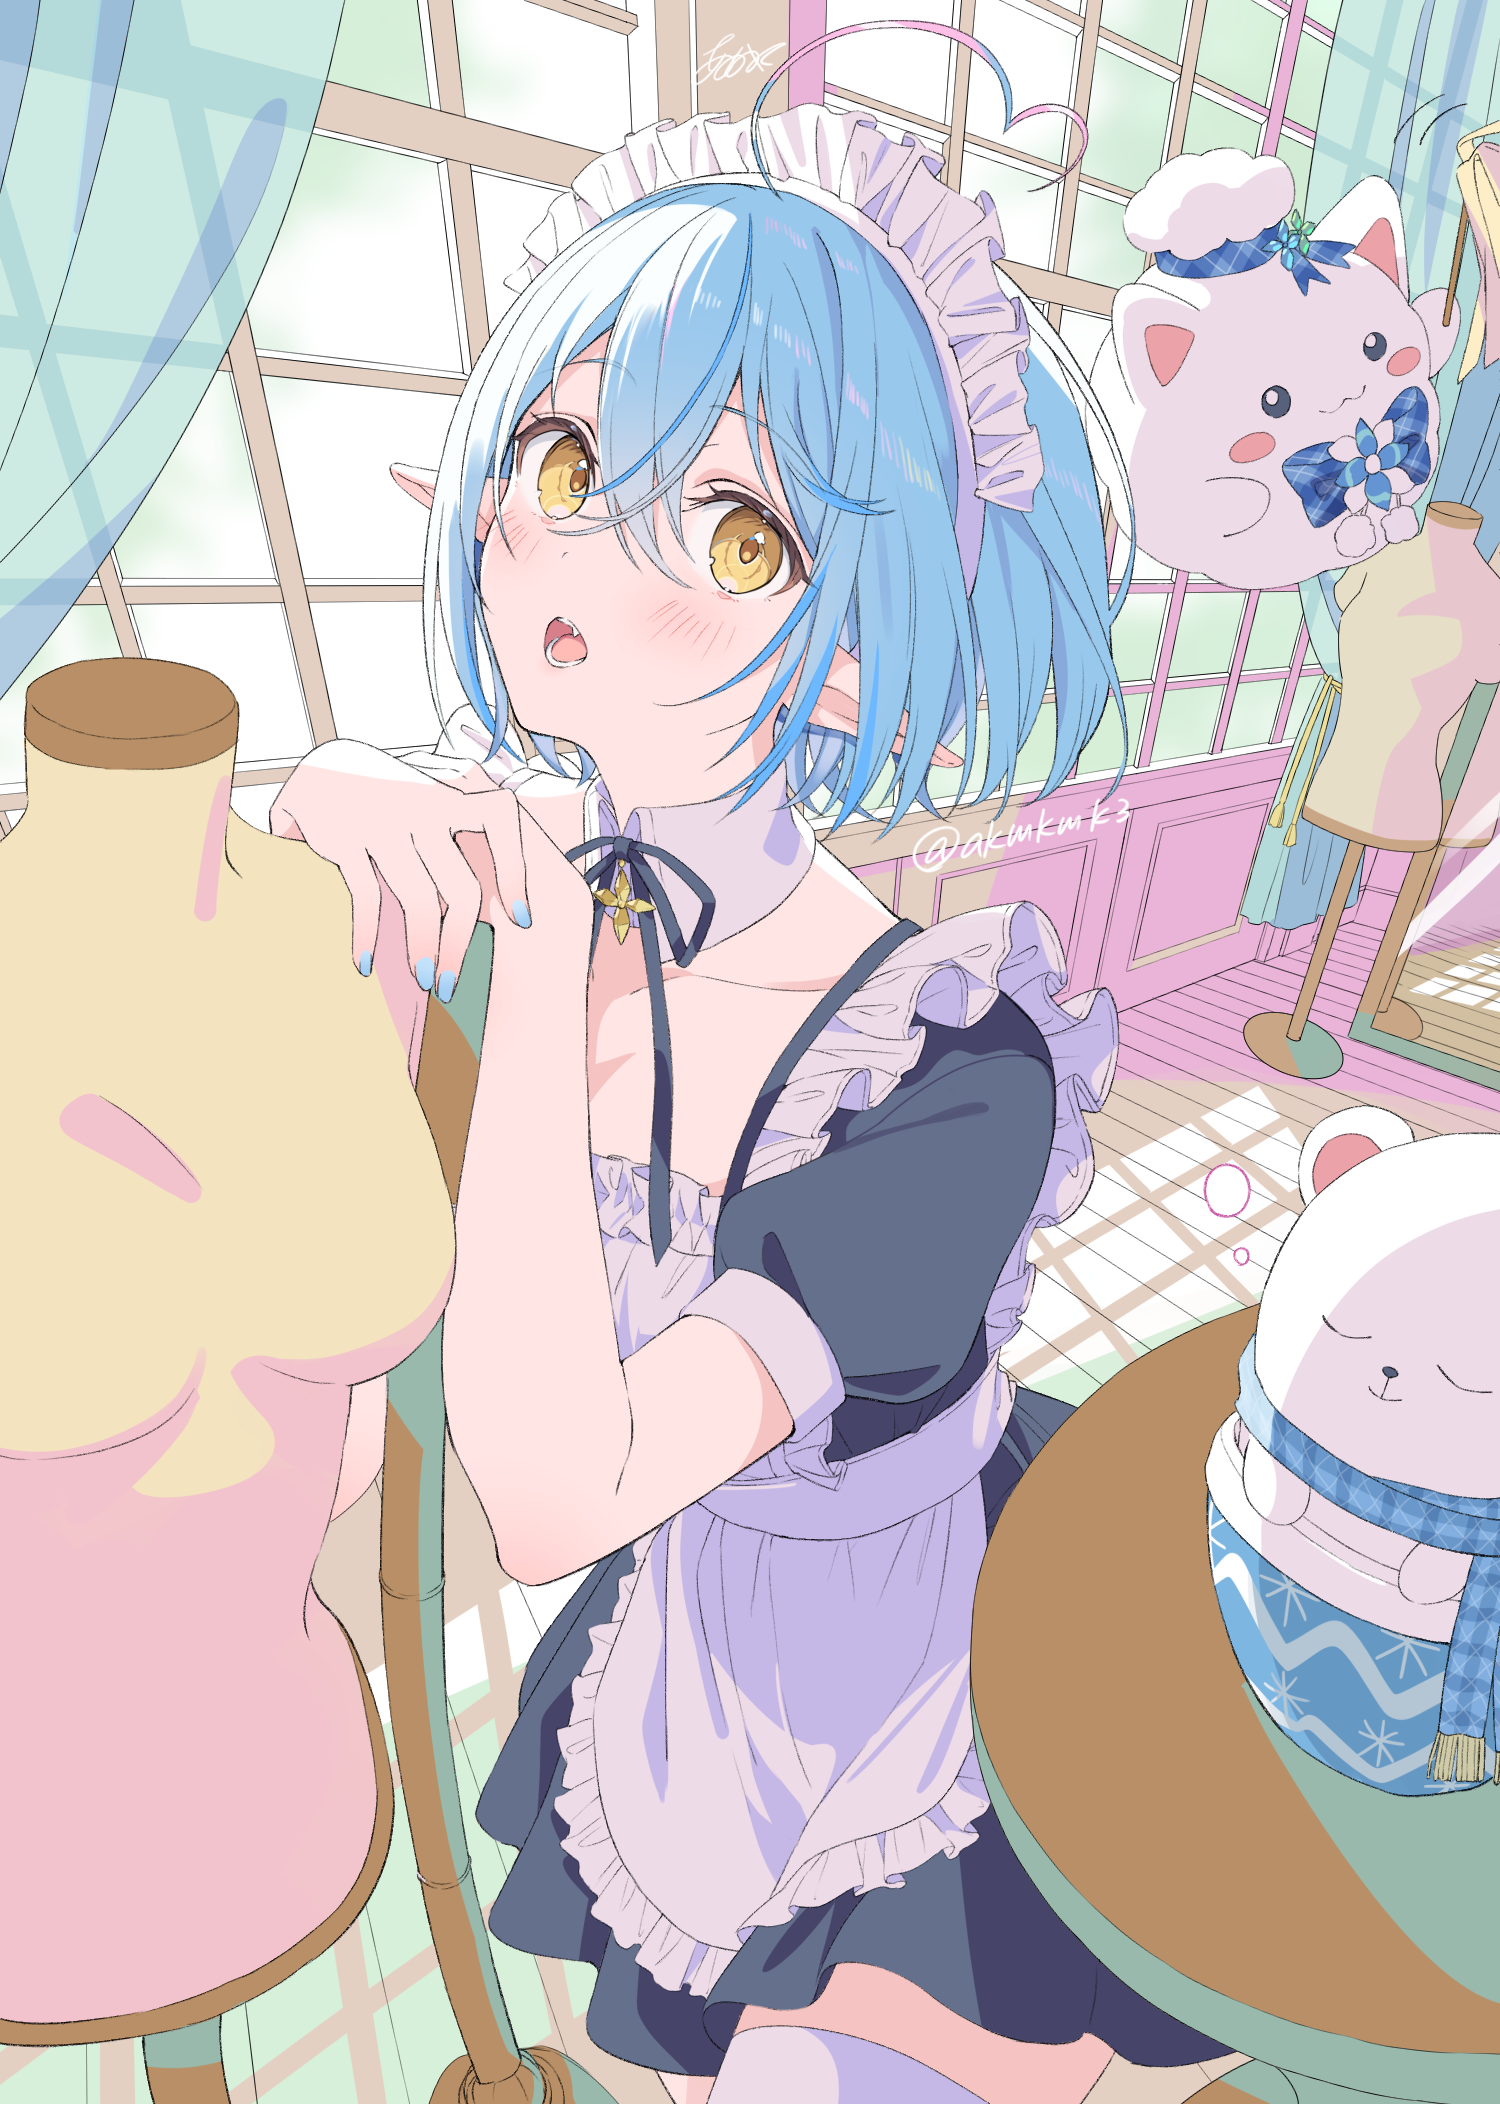 Anime 1500x2104 Hololive anime girls blue hair yellow eyes portrait display maid maid outfit pointy ears looking at viewer